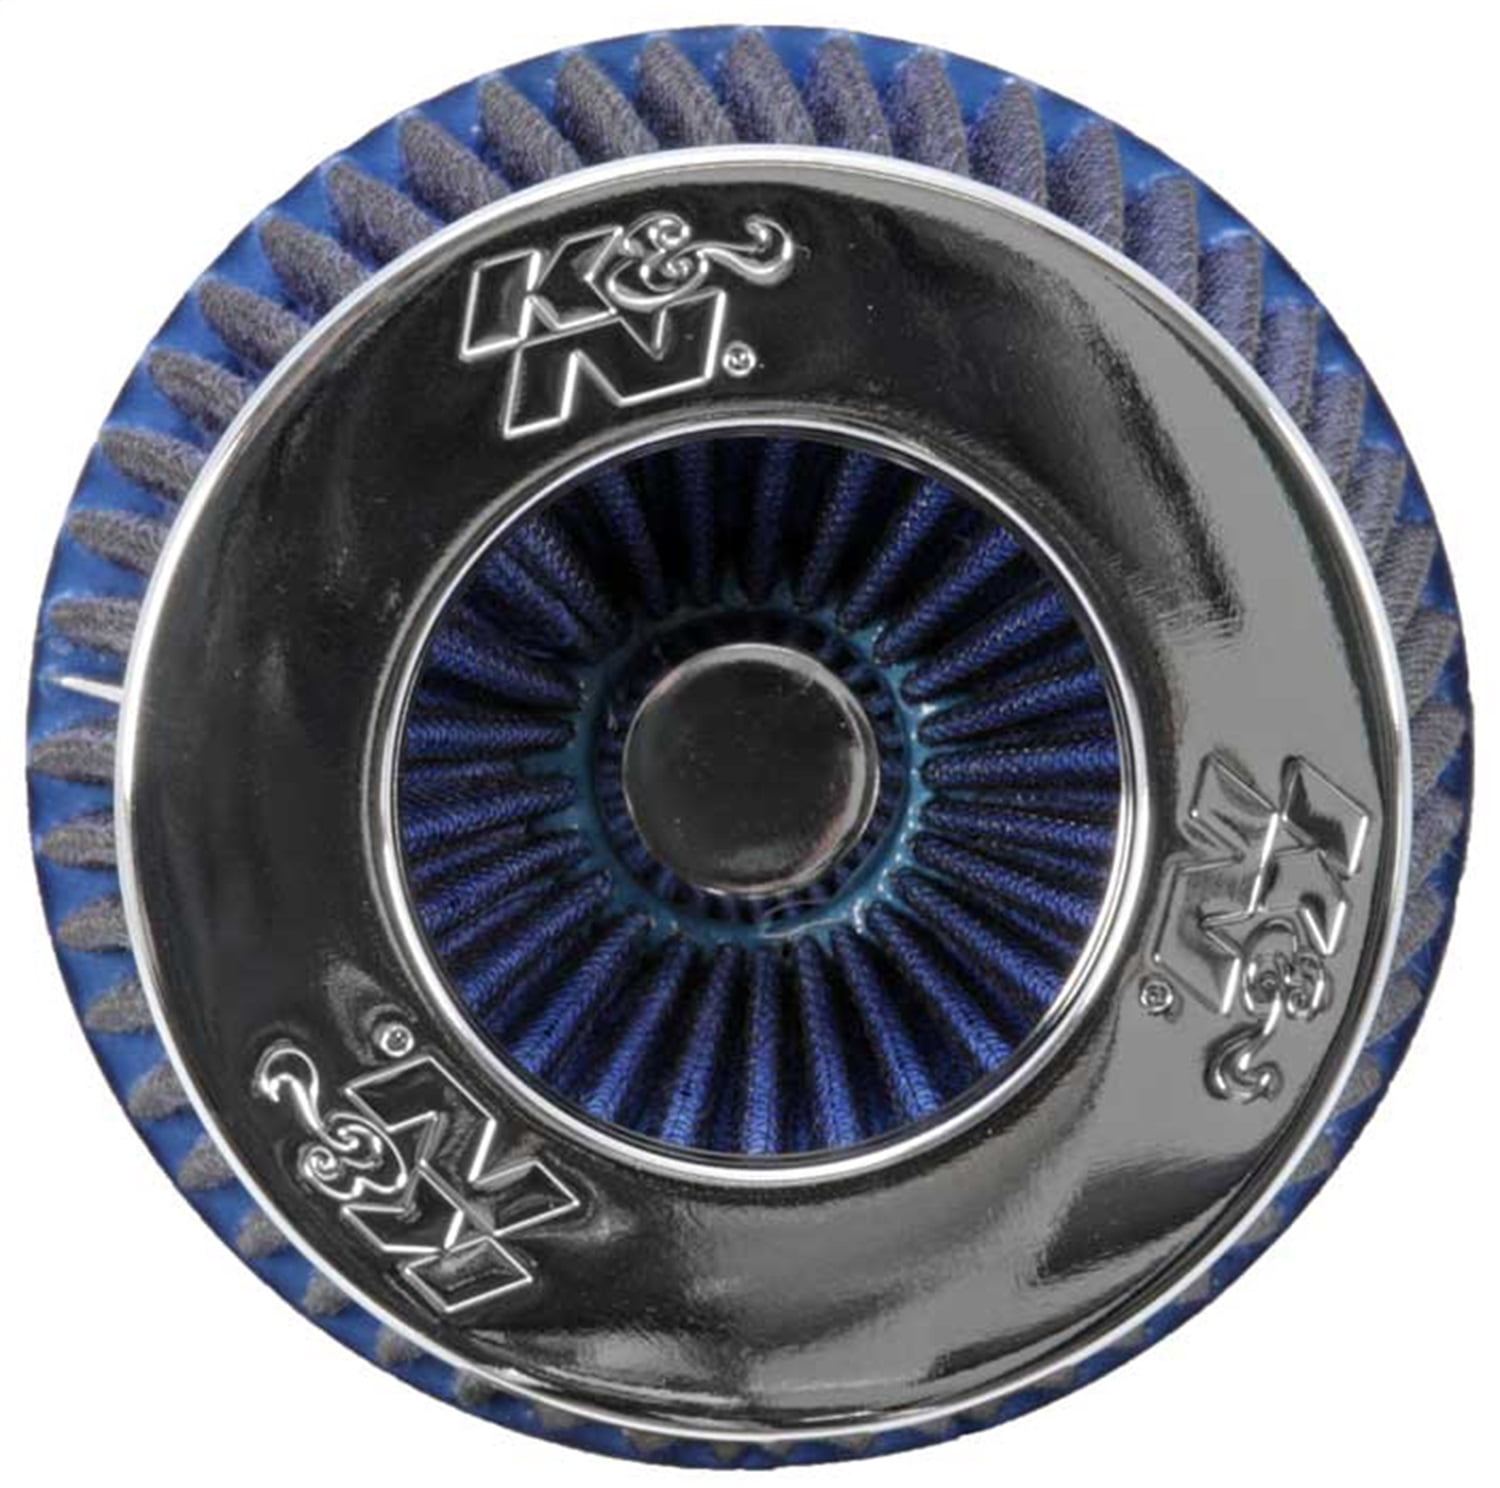 K&N RG-1001BL Universal Clamp-On Air Filter: Round Tapered; 3 in/3.5 in/4 in 140 mm Base; 4.75 in Top K&N Engineering 121 mm Height; 6 in Flange ID; 5.5 in 152 mm 102 mm/89 mm/76 mm 